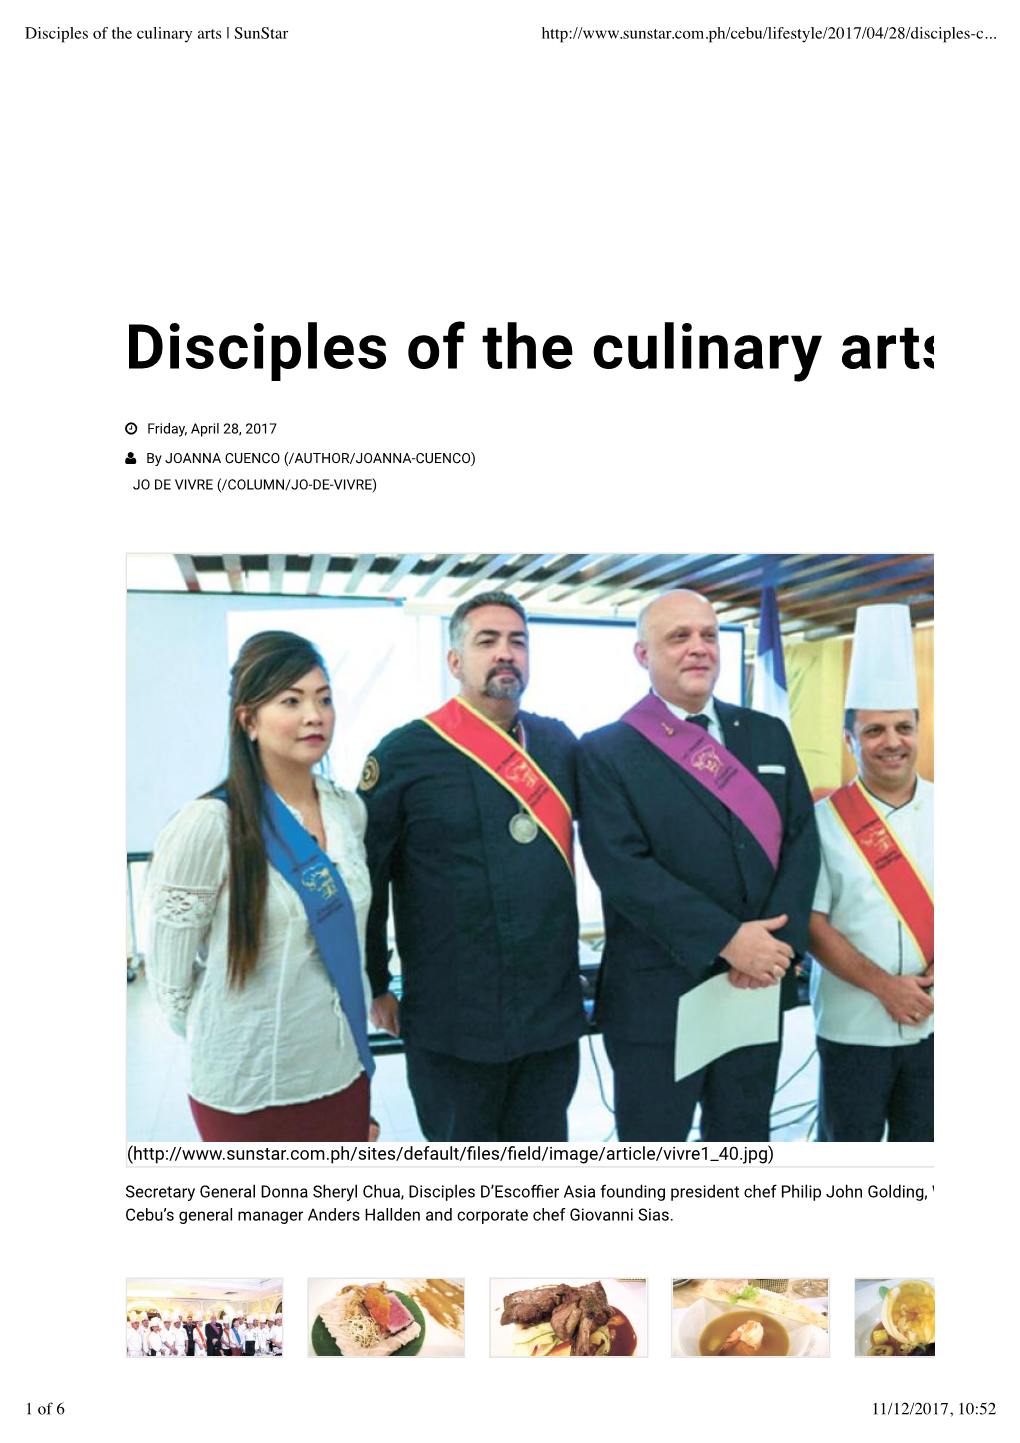 Disciples of the Culinary Arts | Sunstar